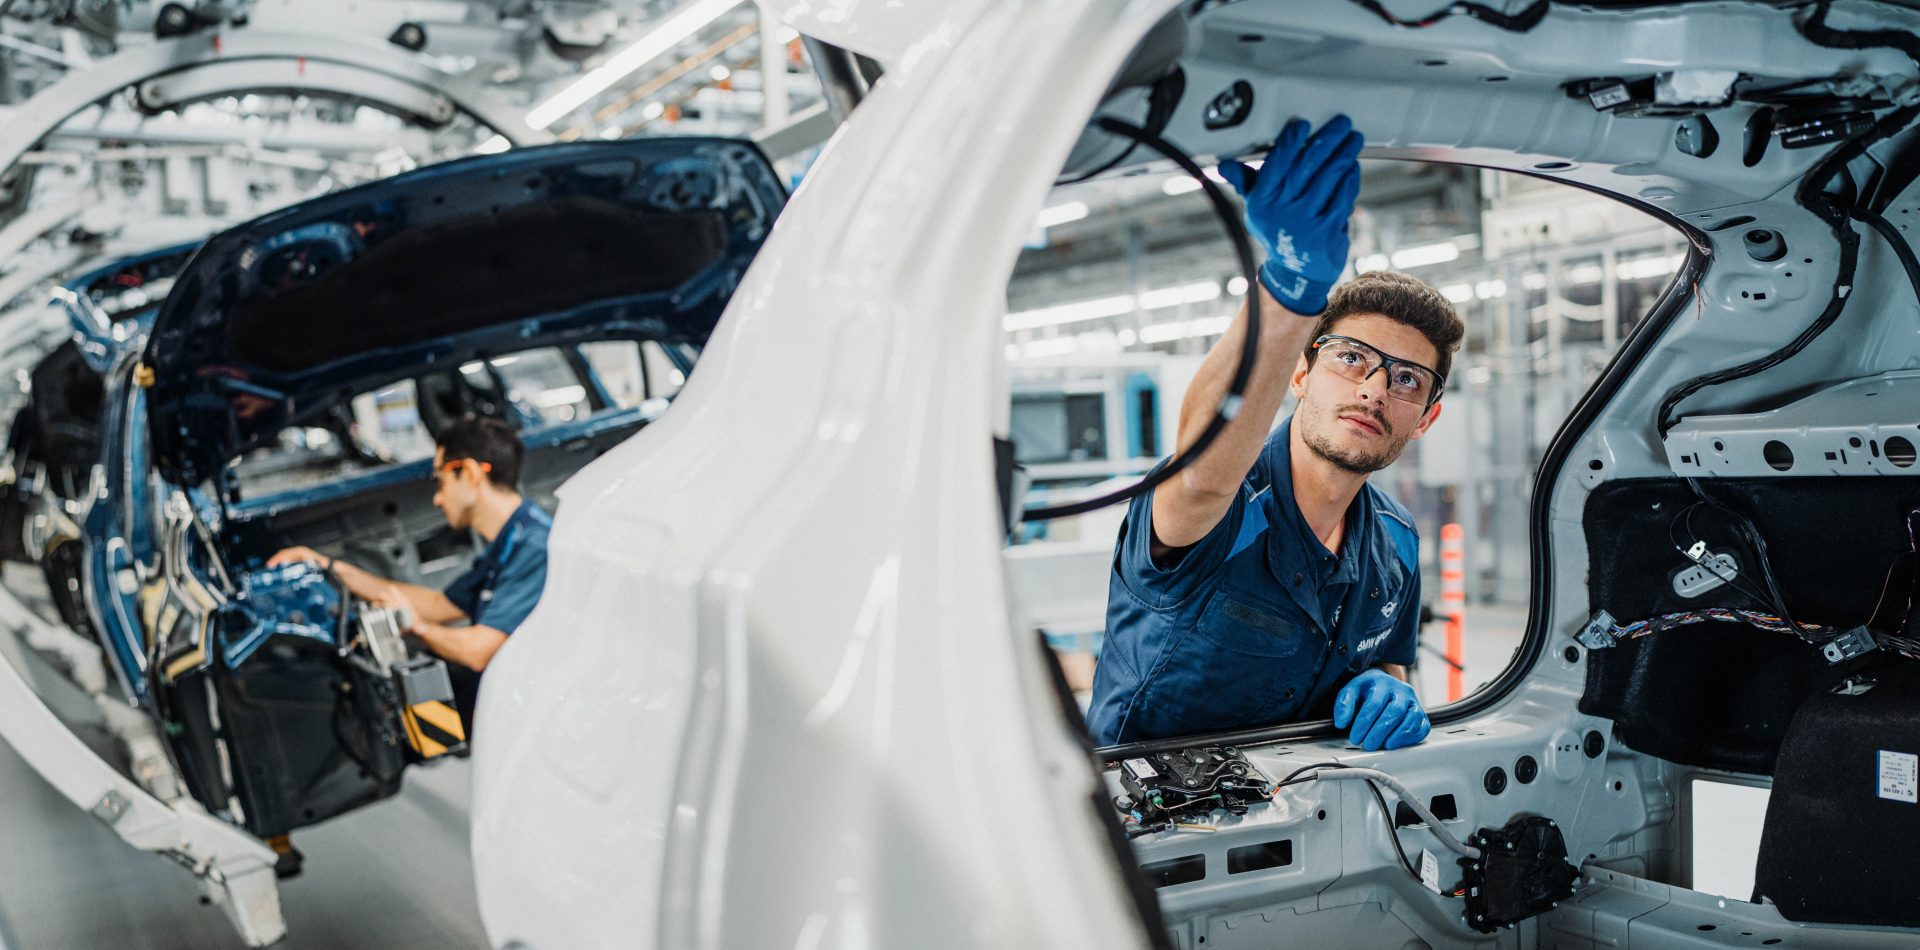 The picture shows two men working in production at BMW.